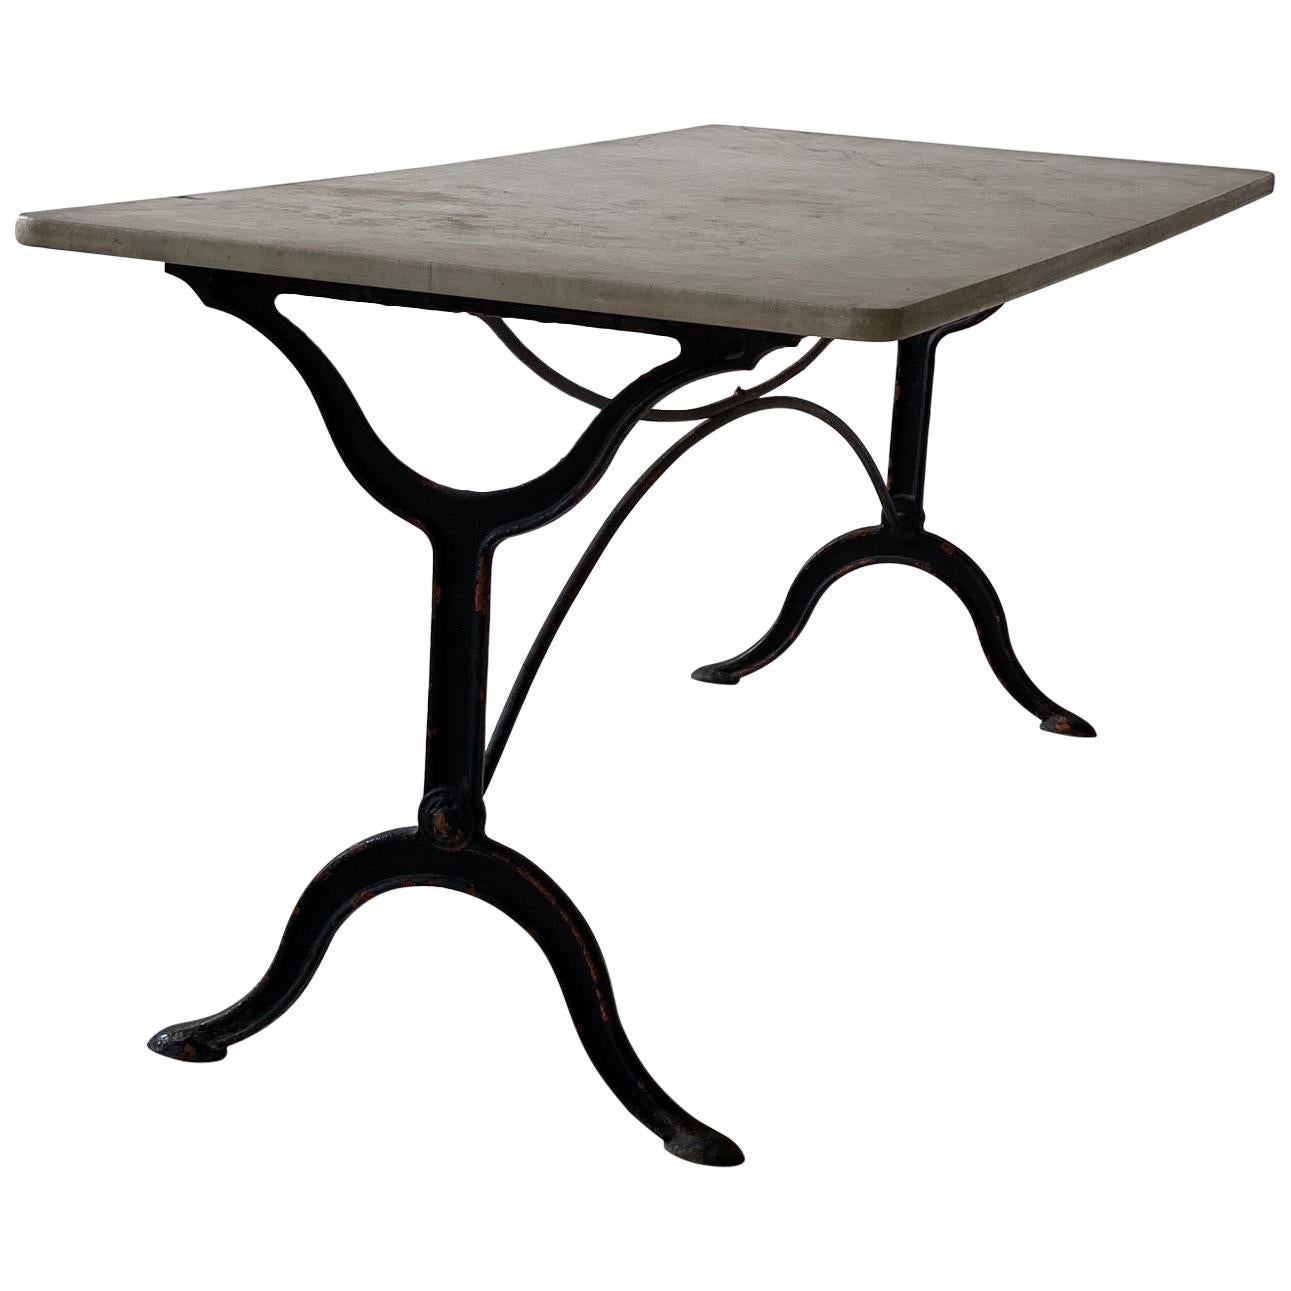 French Wrought Iron Garden Table with Marble Top